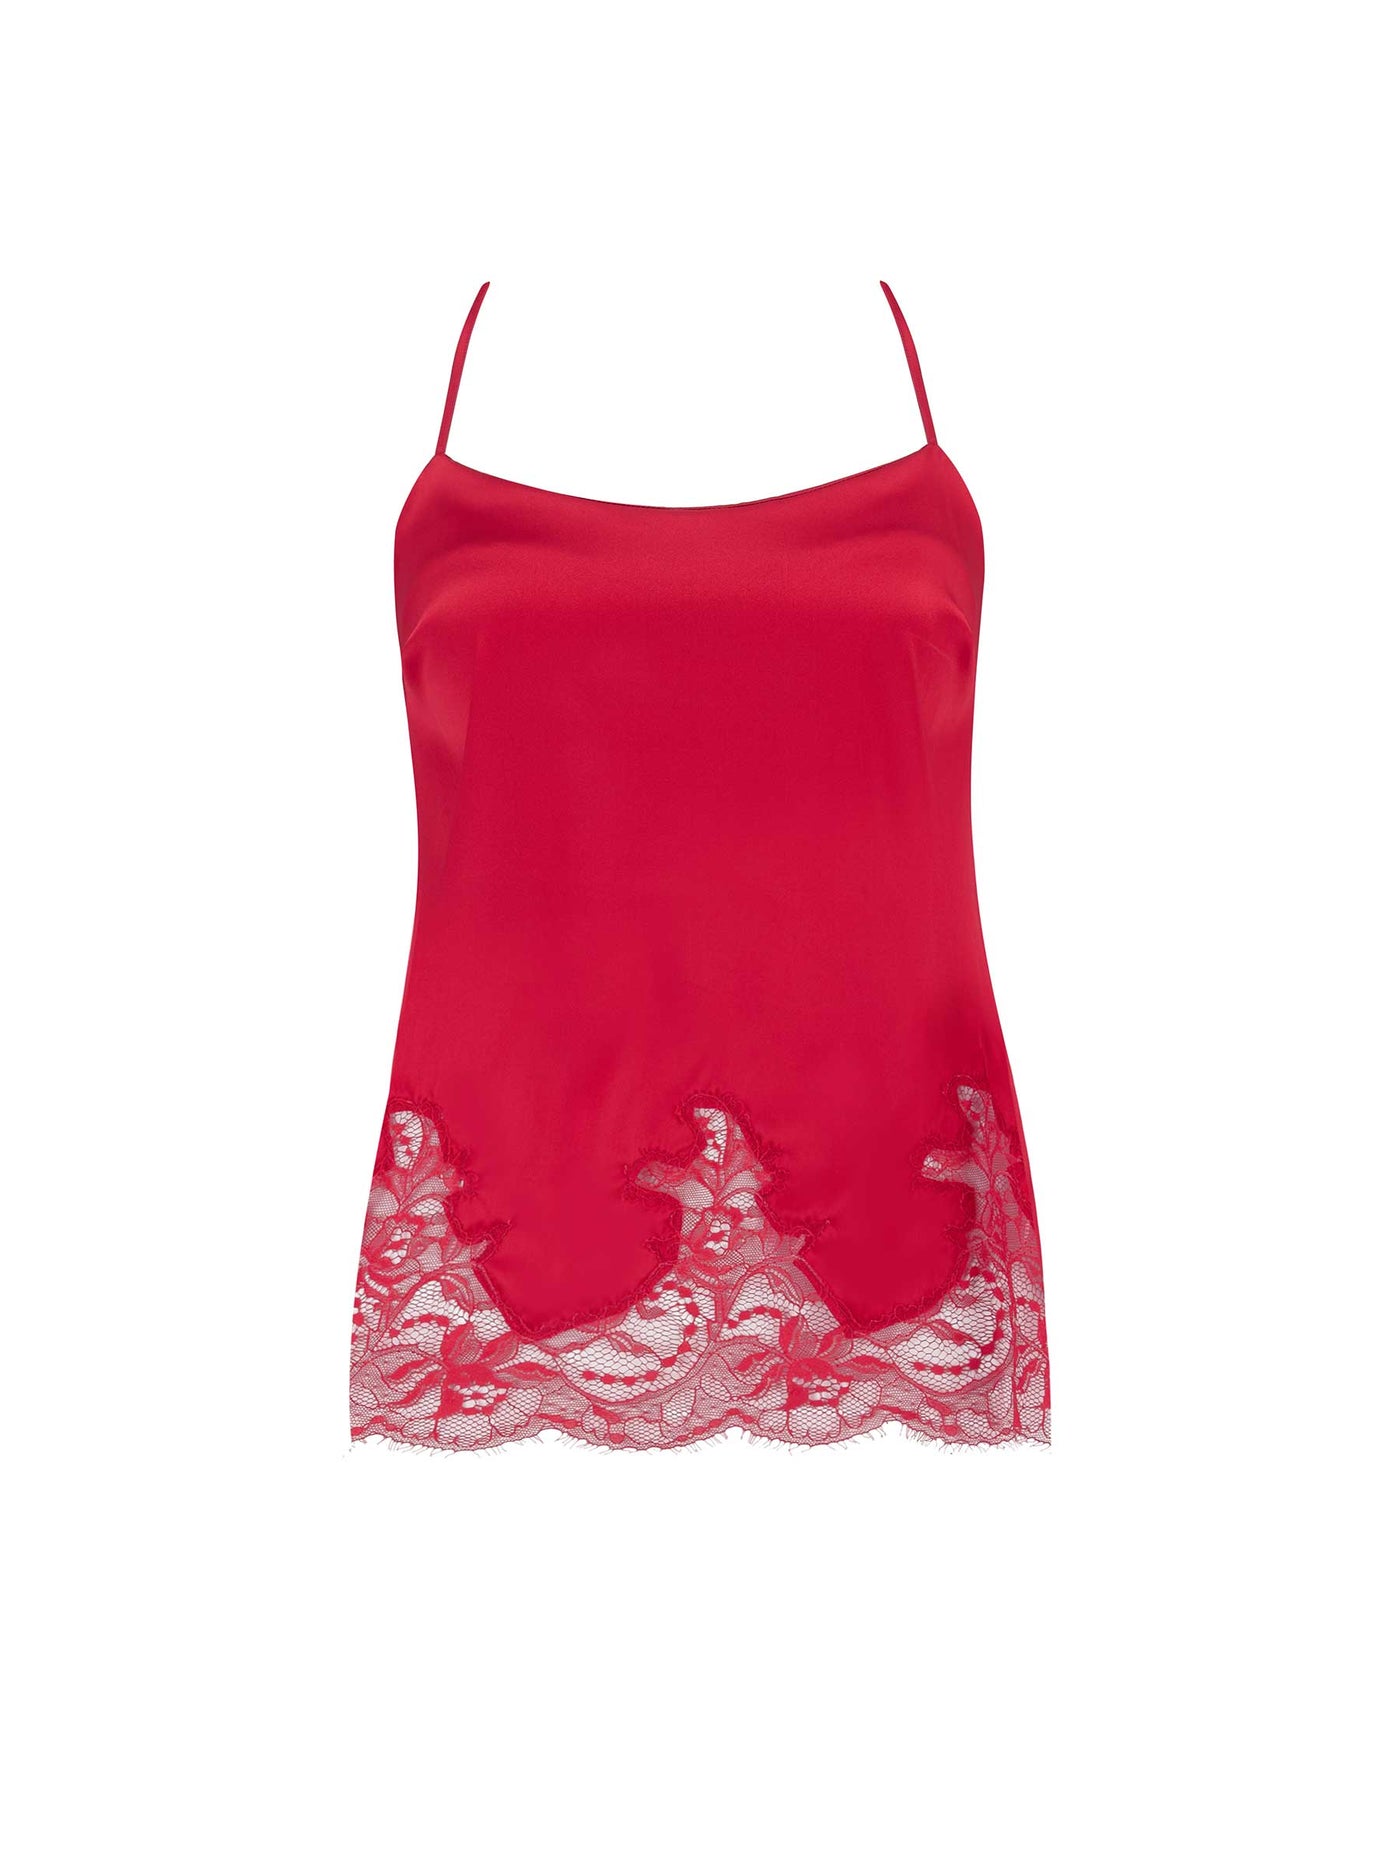 Front of Fleur of England red, silk camisole with lace hem, from the Adeline collection.